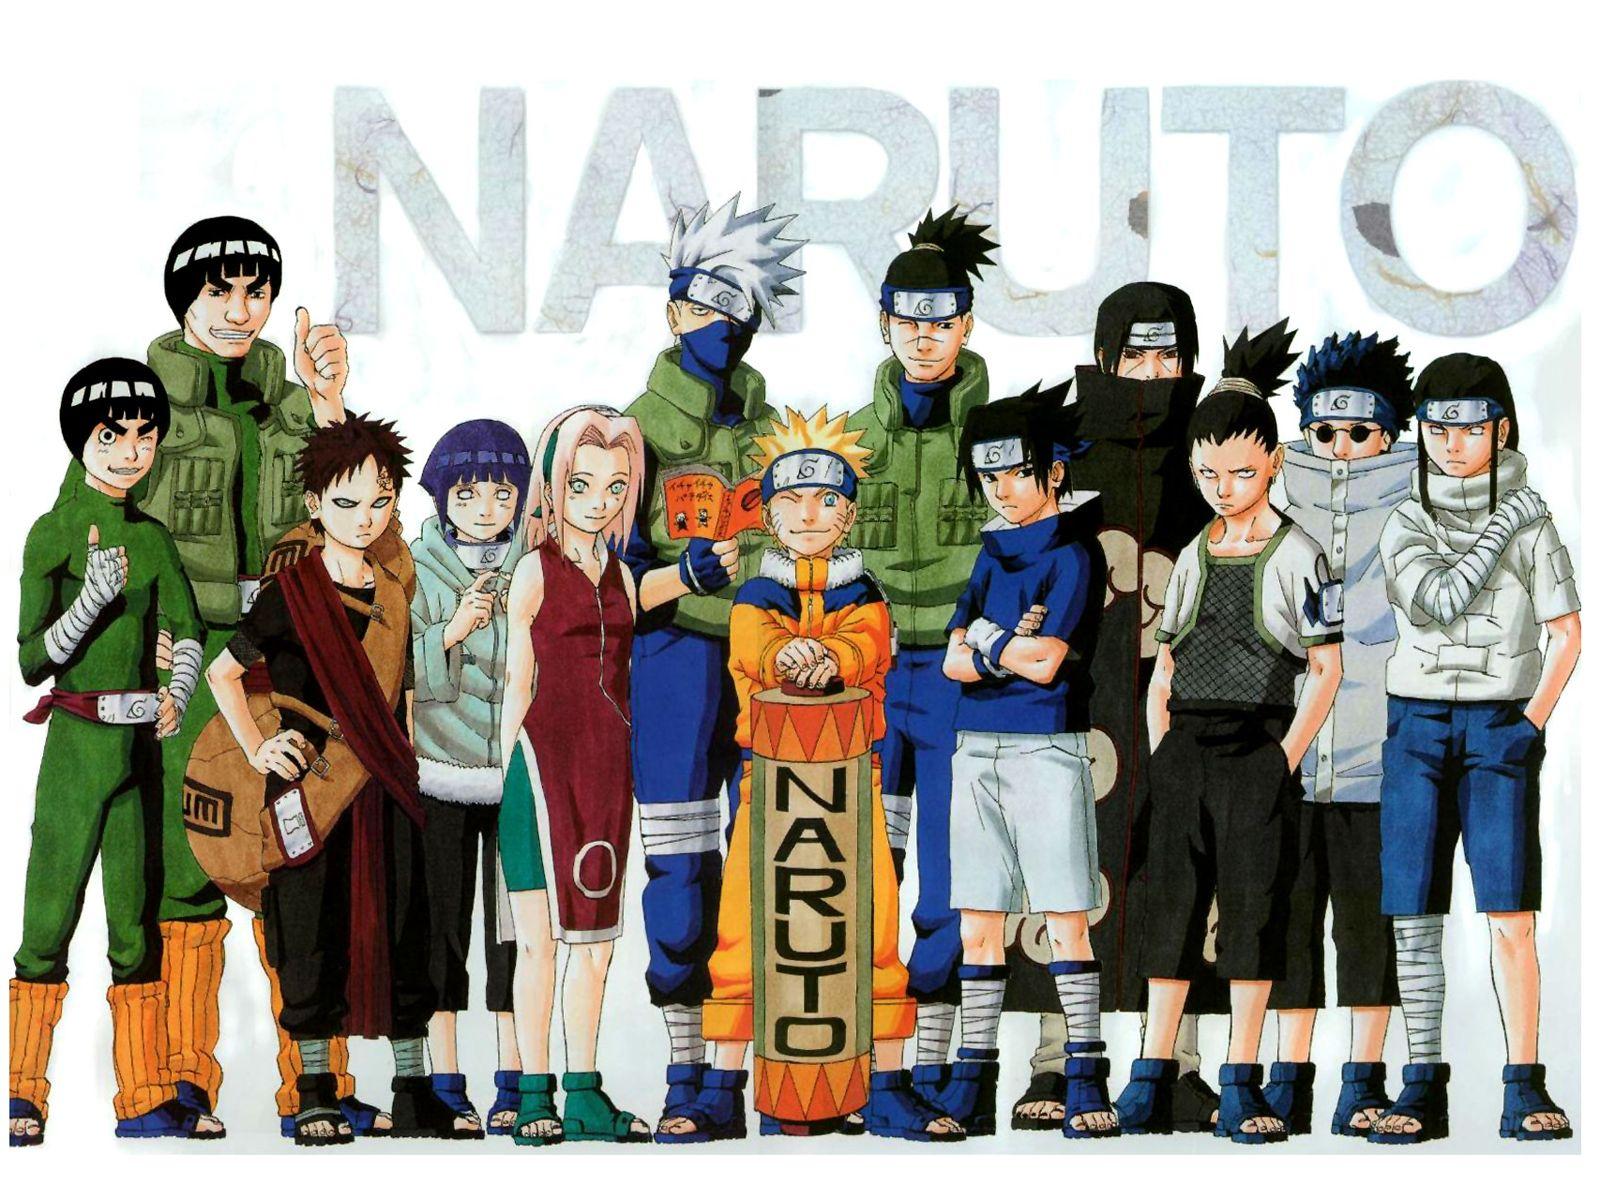 Anime Naruto Characters Wallpaper Backgrounds Hd Of Laptop